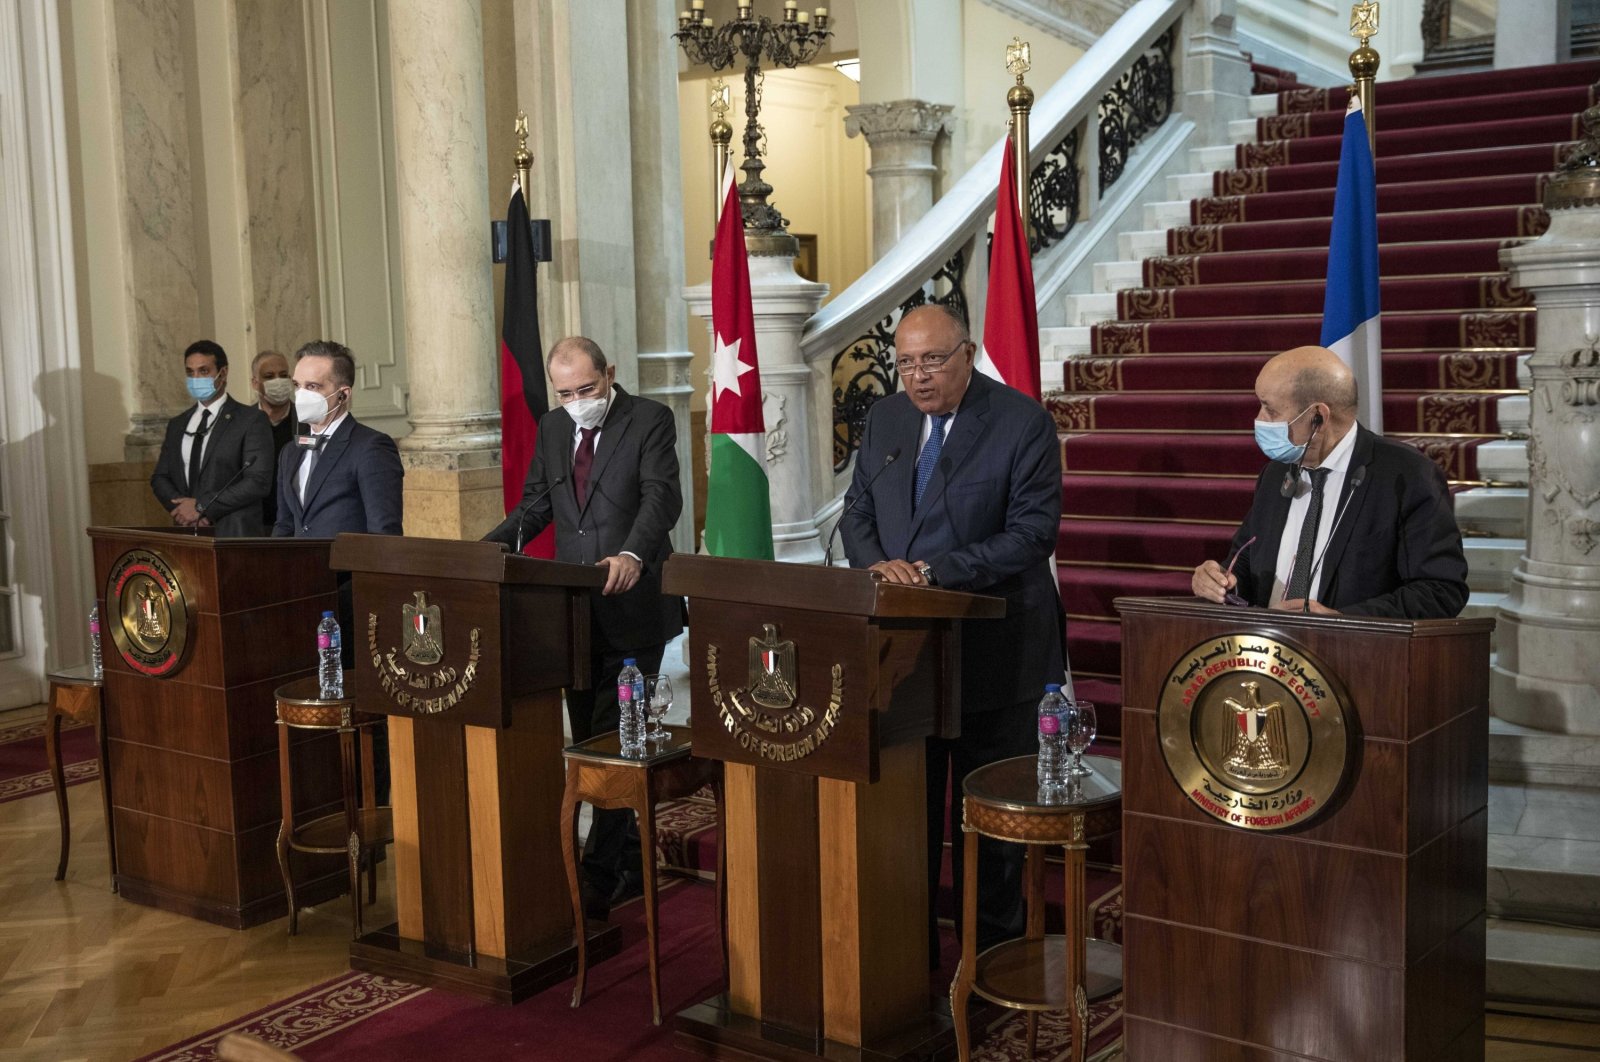 From left to right, German Foreign Minister Heiko Maas, Jordanian Foreign Minister Ayman Safadi, Egyptian Foreign Minister Sameh Sahoukry and French Foreign Minister Jean-Yves Le Drian hold a news conference at Tahrir Palace, Cairo, Egypt, Jan. 11, 2021. (AP)